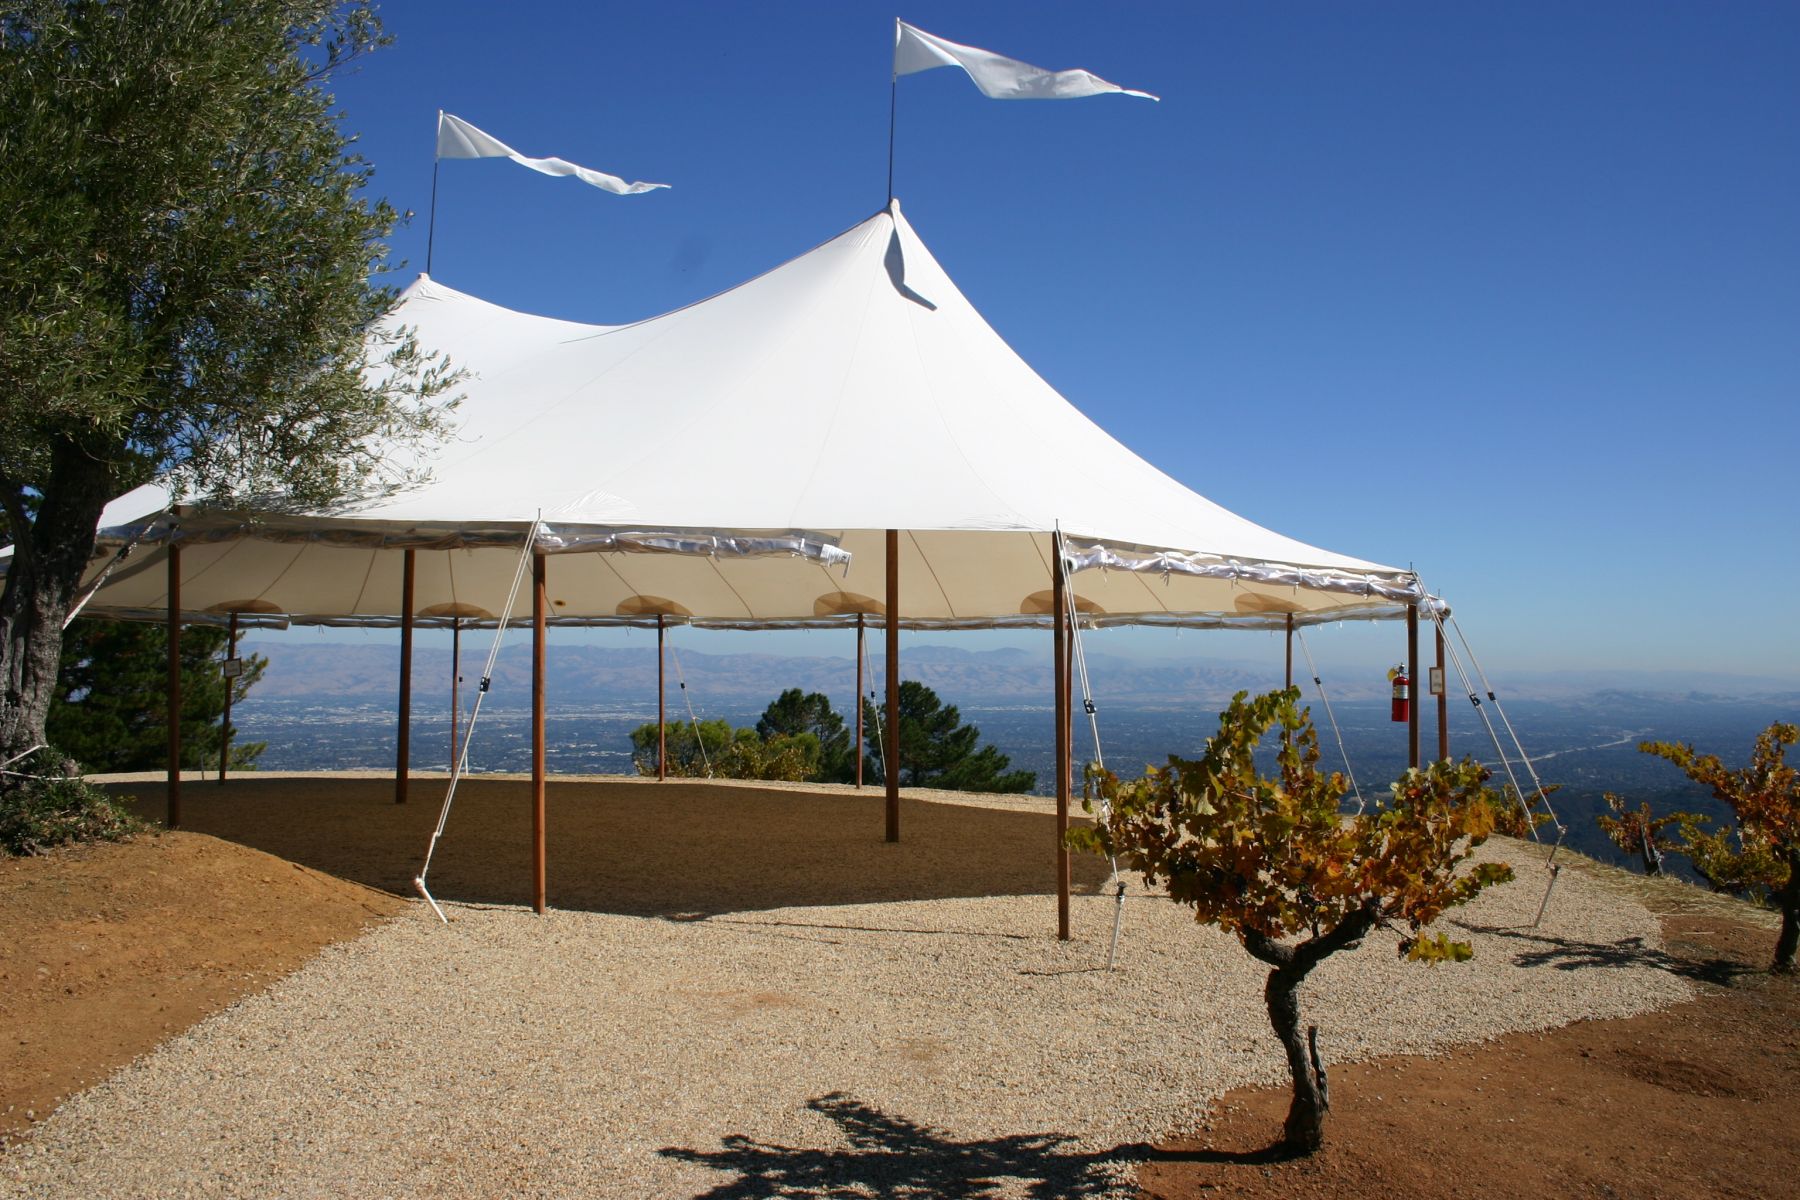 32 x 50 Sperry tent ridge winery cocktail canopy